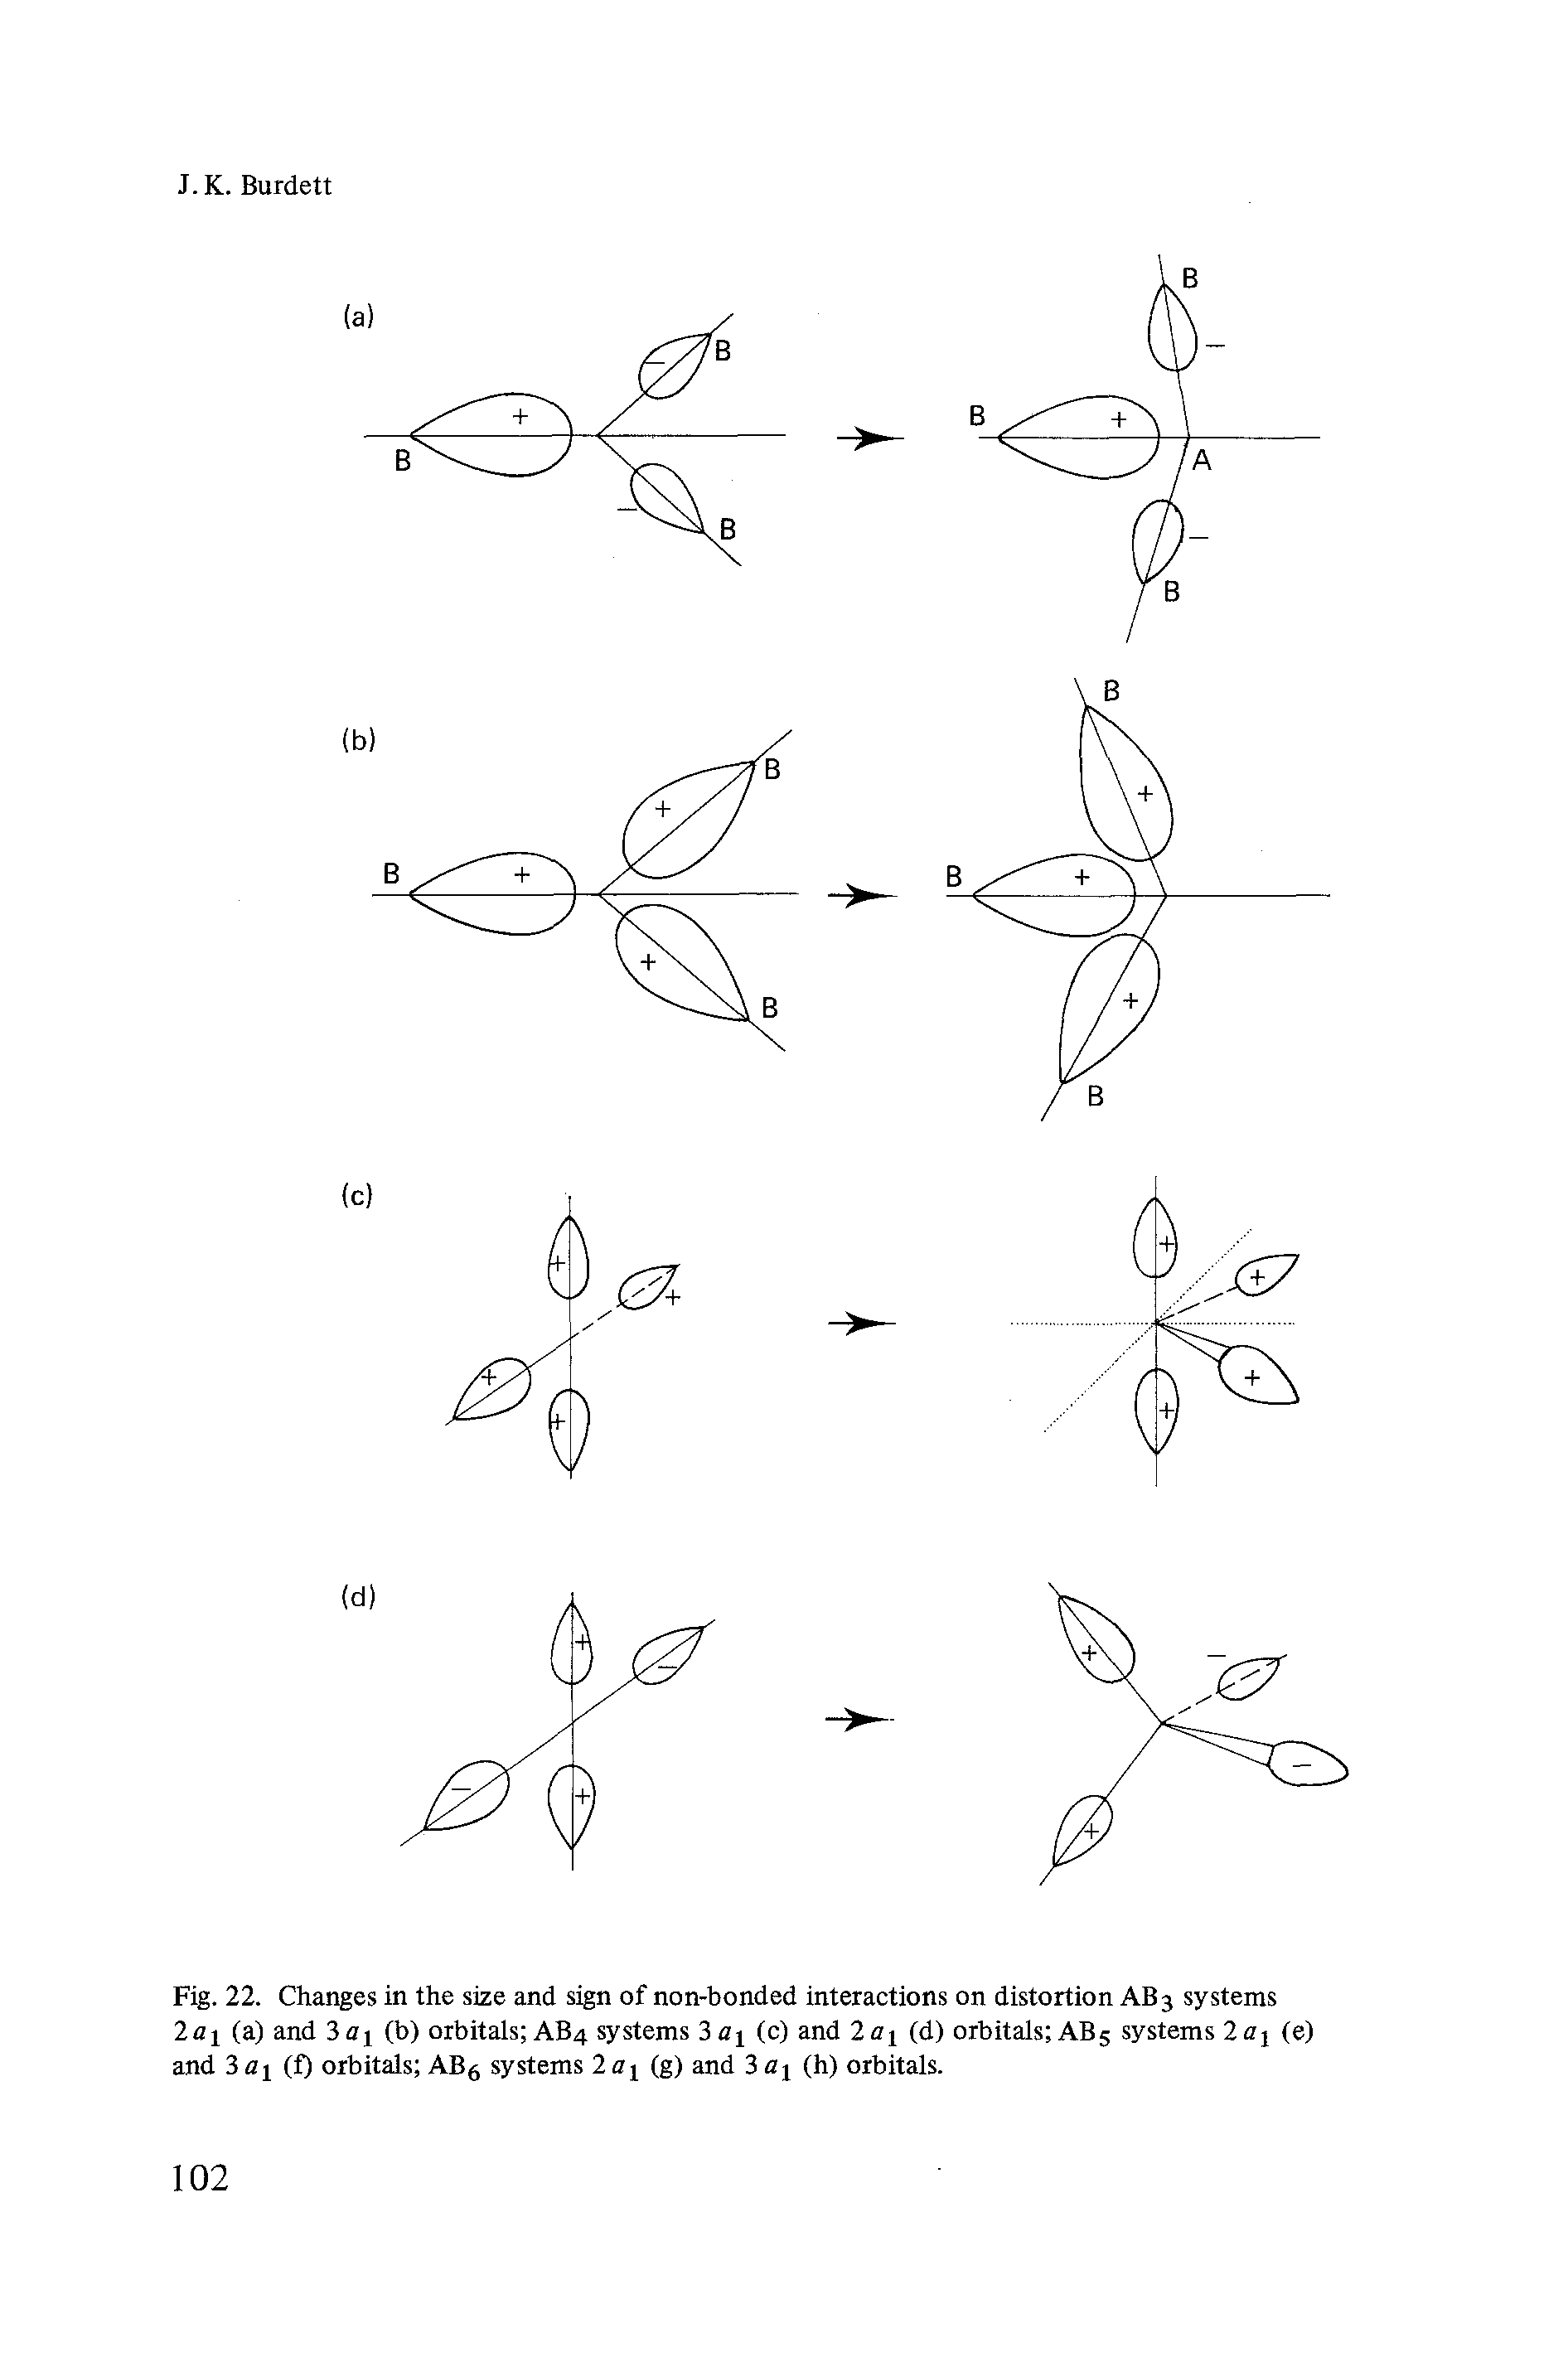 Fig. 22. Changes in the size and sign of non-bonded interactions on distortion AB3 systems 2fli (a) and 3ax (b) orbitals AB4 systems 3 ax (c) and 2ax (d) orbitals AB5 systems 2ax (e) and 3 ax (f) orbitals ABg systems 2 ax (g) and 3 ax (h) orbitals.